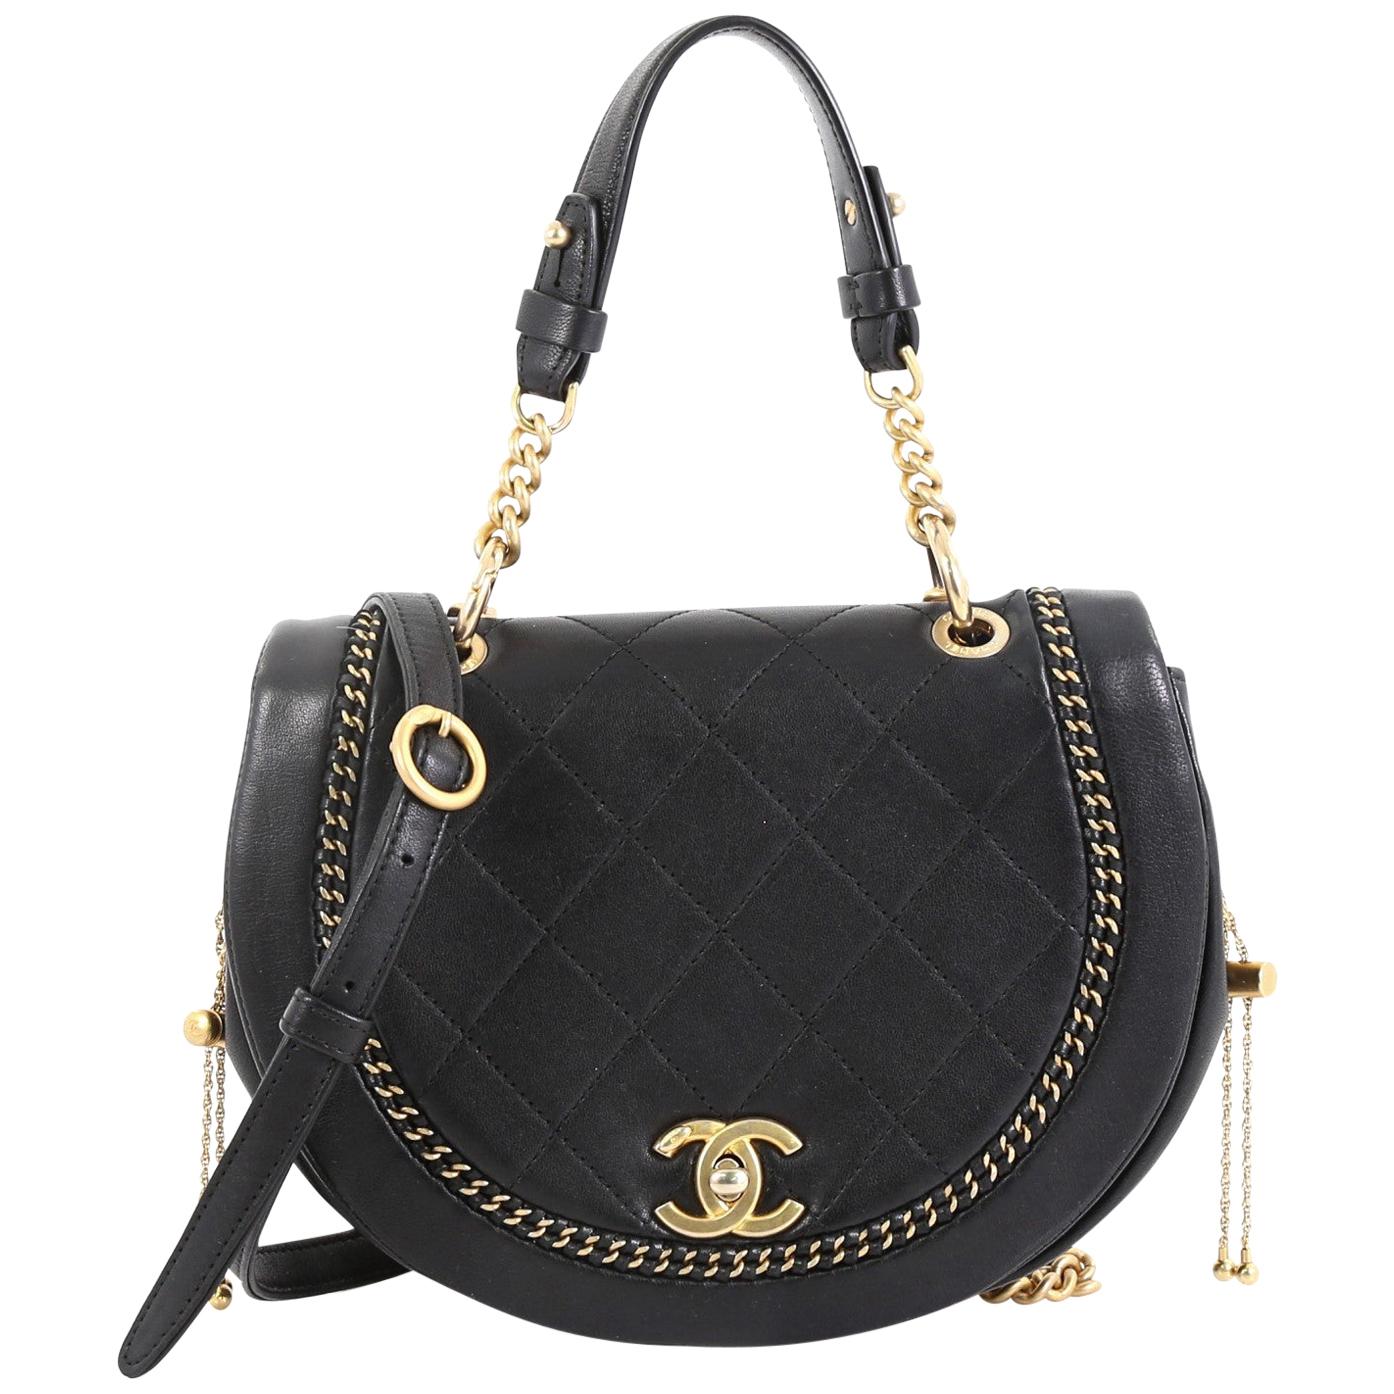 Buy Chanel Saddle Bag Online In India -  India